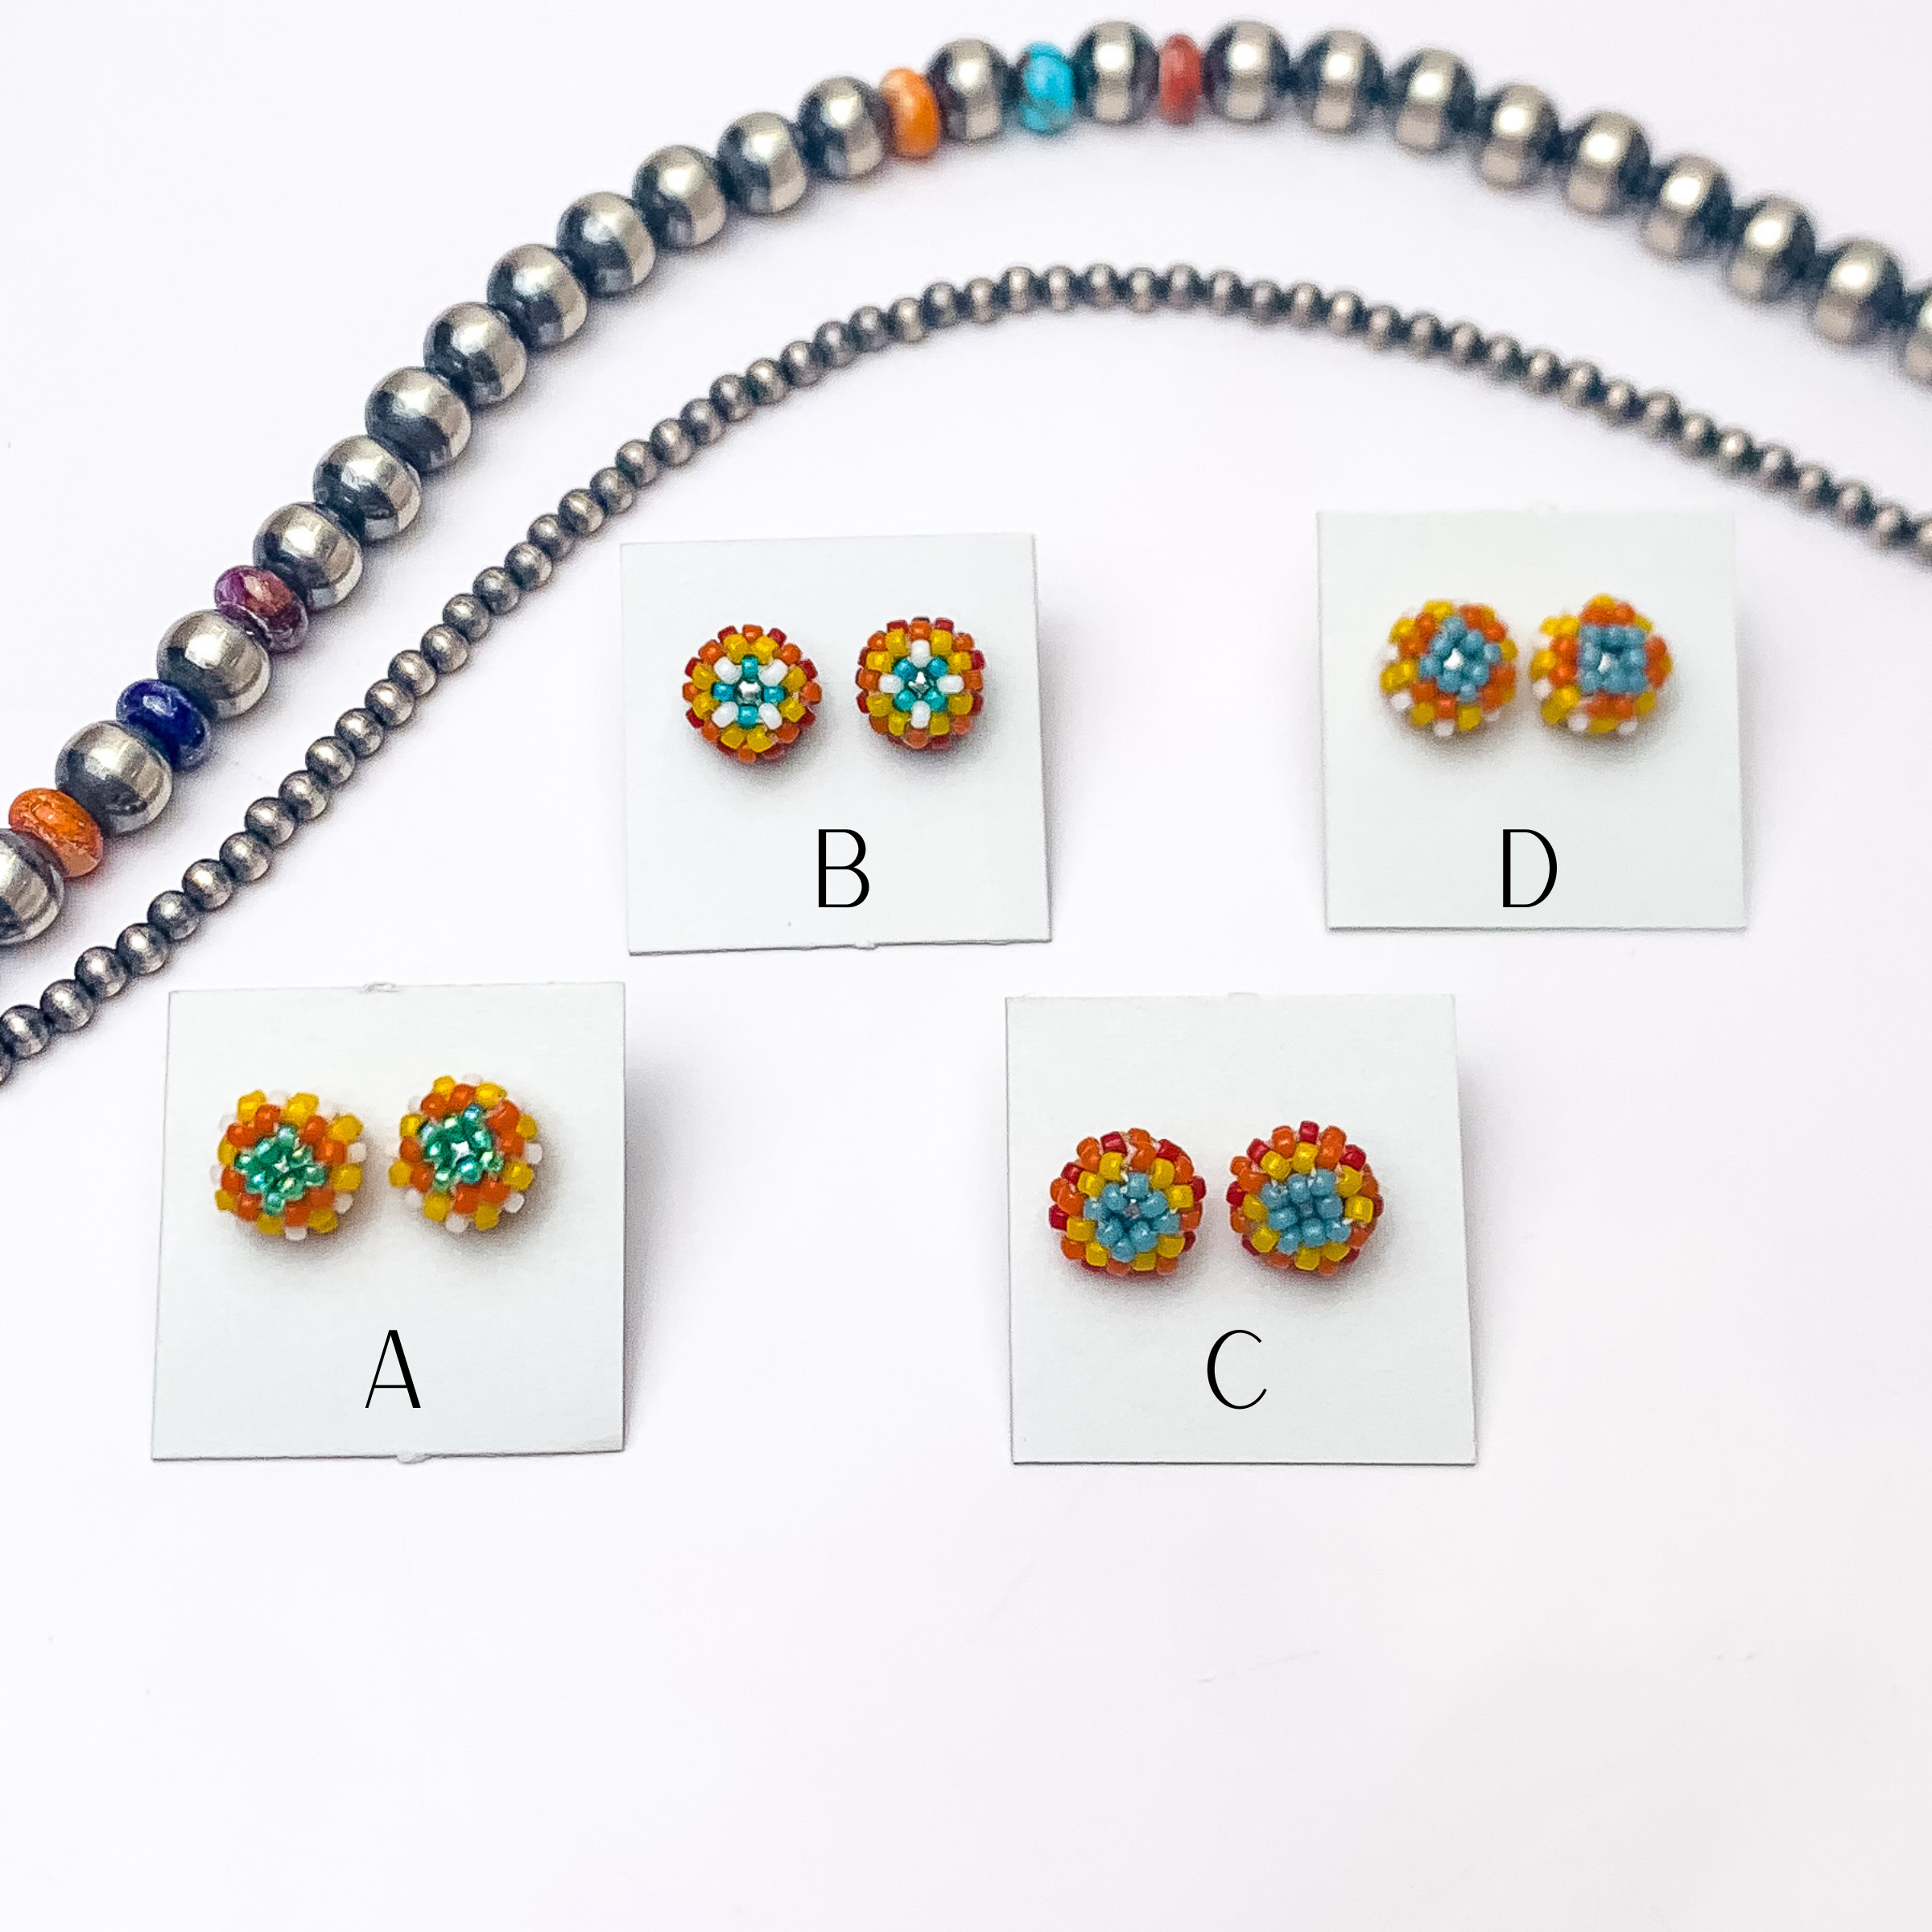 Navajo | Navajo Handmade Beaded Stud Earrings in Turquoise, Yellow, and Red - Giddy Up Glamour Boutique